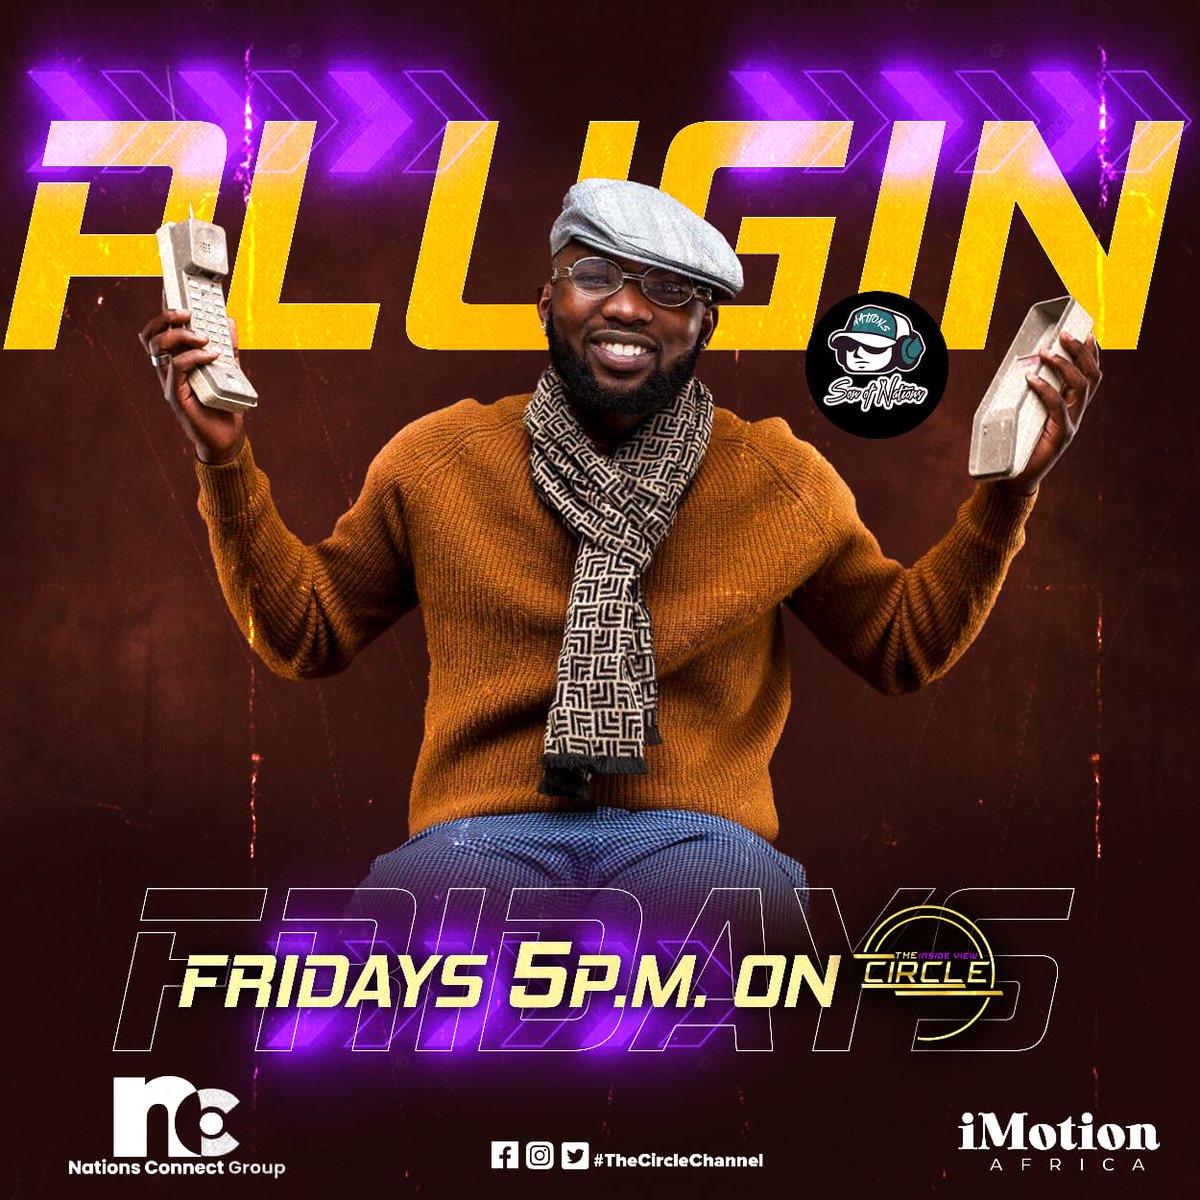 🎵 Get ready for a musical journey like no other! 🌟 Join us every Friday at 5 pm for the 'Plugin' show on #TheCircleChannel @sonofnations. Unleash the power of music and elevate your weekend vibes! 🎶✨ #PluginShow #MusicMagic #FridayFeeling